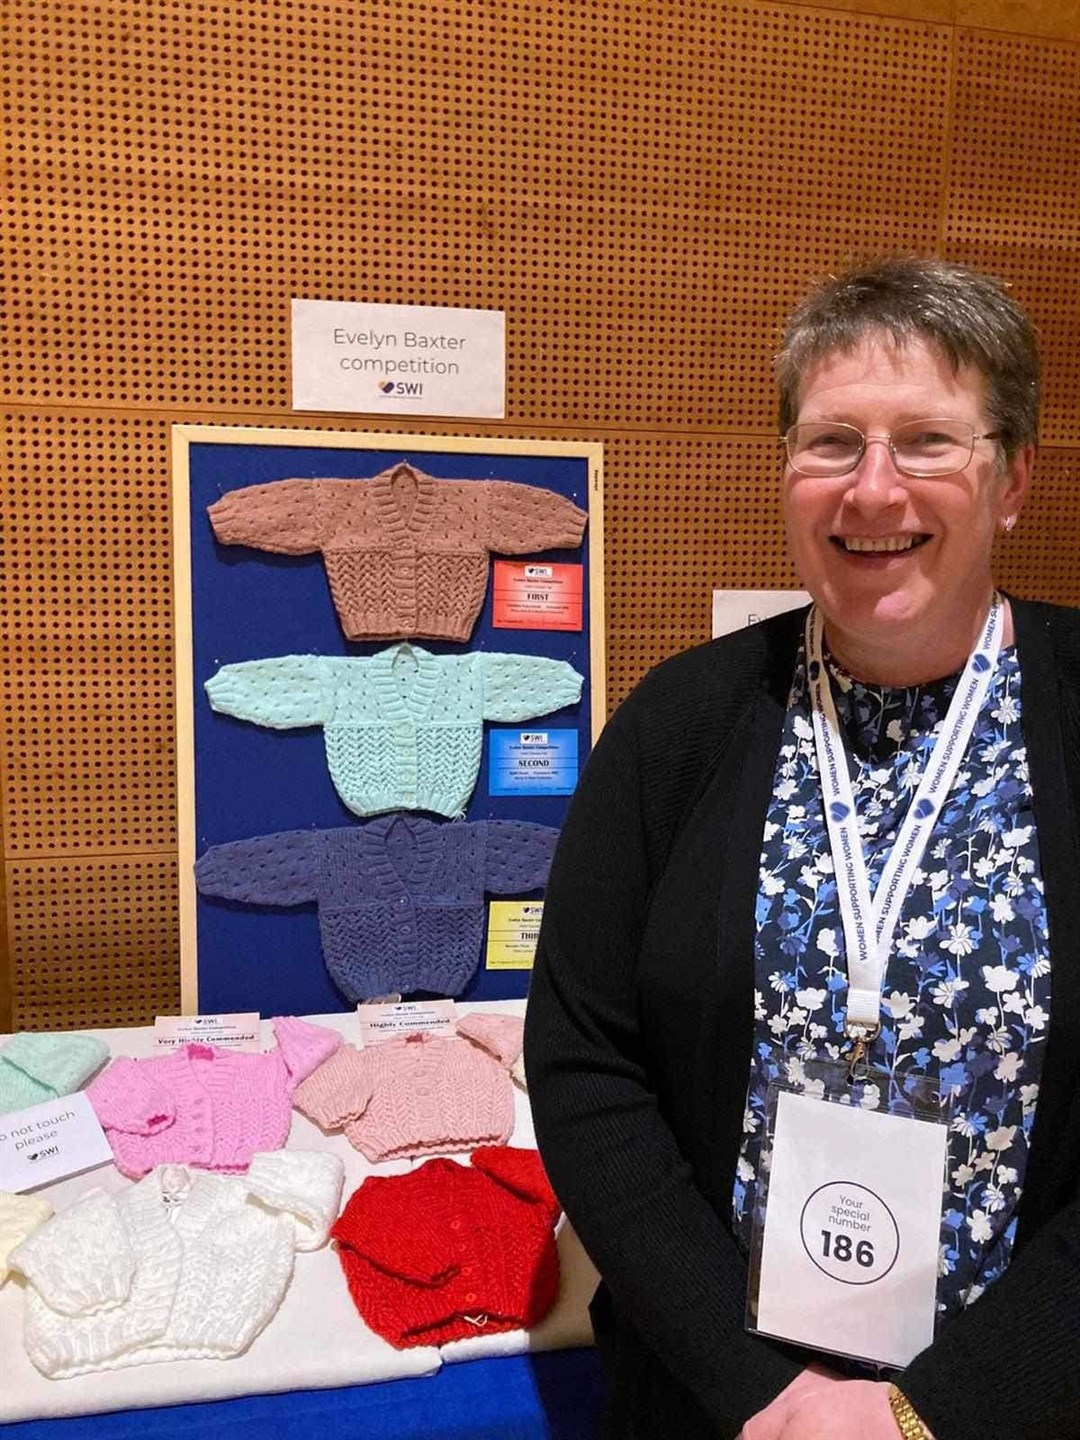 Christine Pokernecki next to her entry. Picture courtesy of Ross-shire and Sutherland Federation SWI